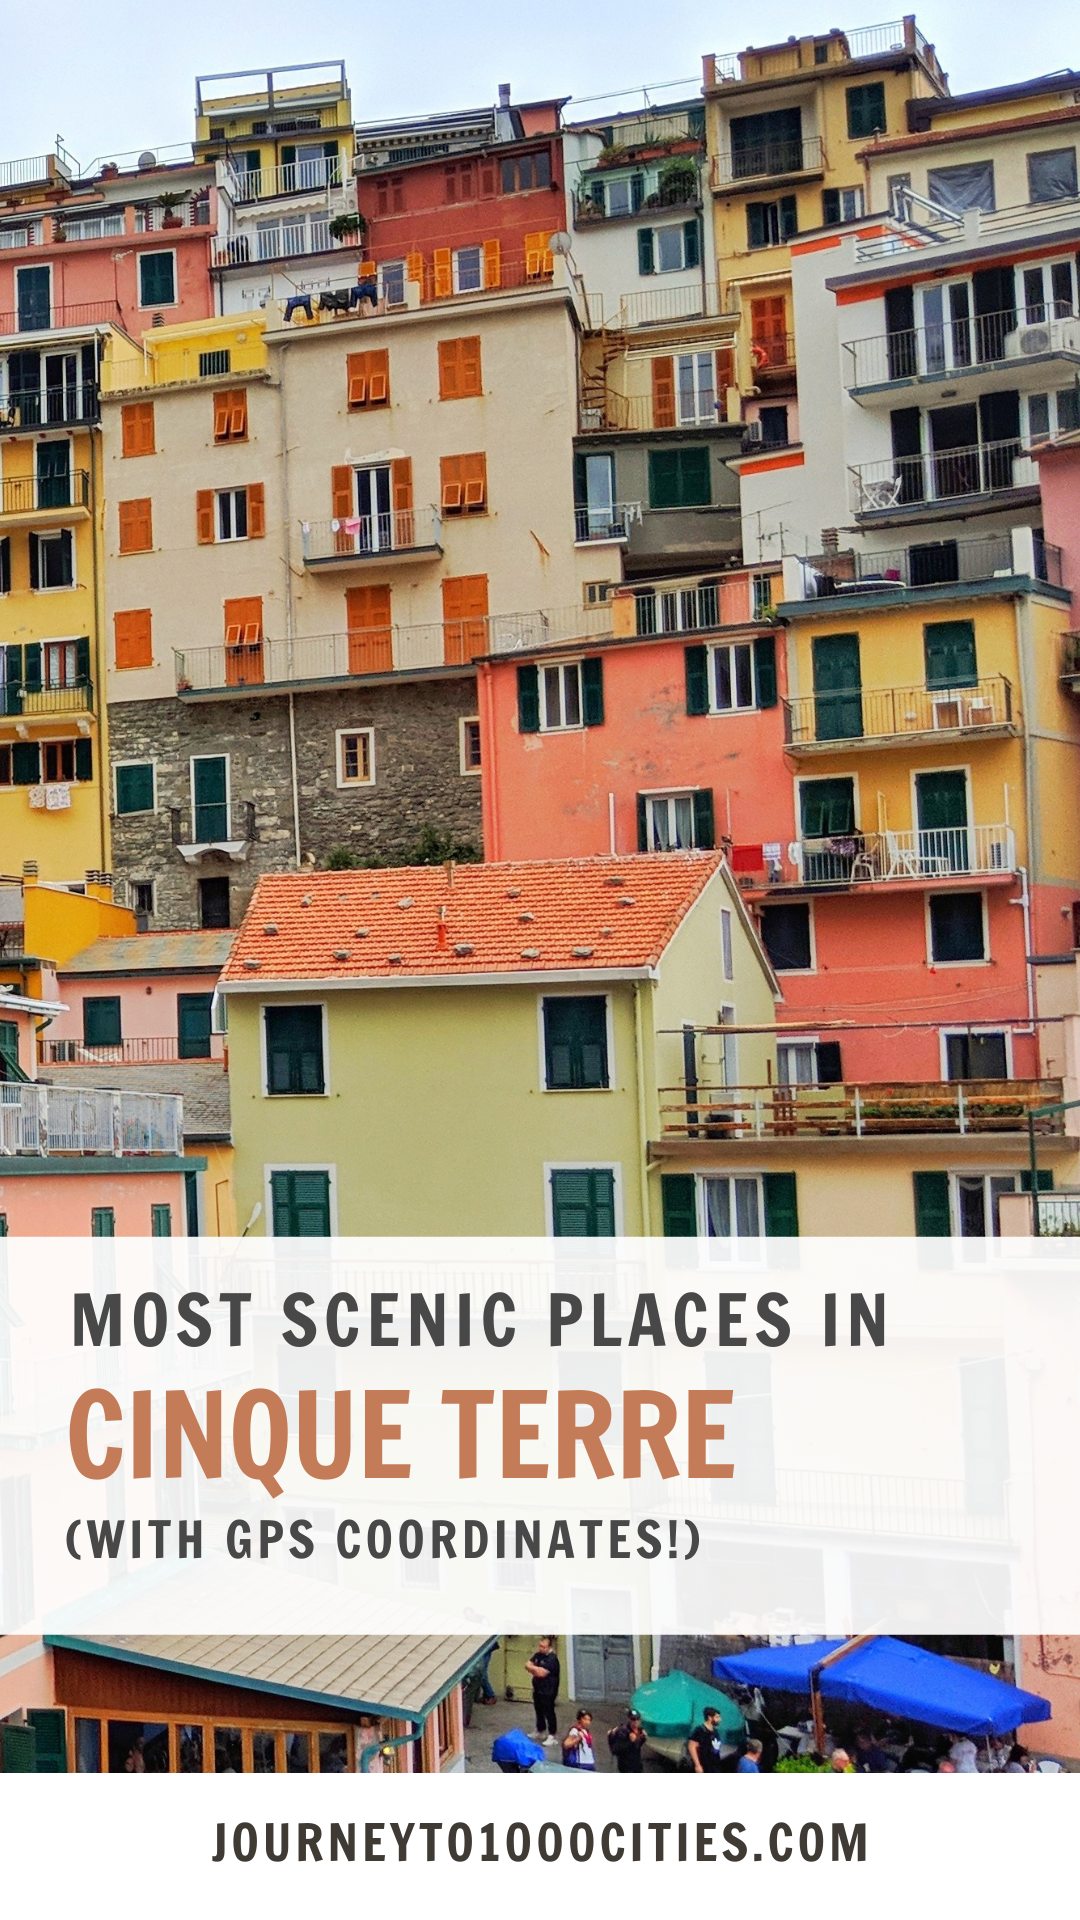 Most Instagrammable Spots in Cinque Terre, Italy